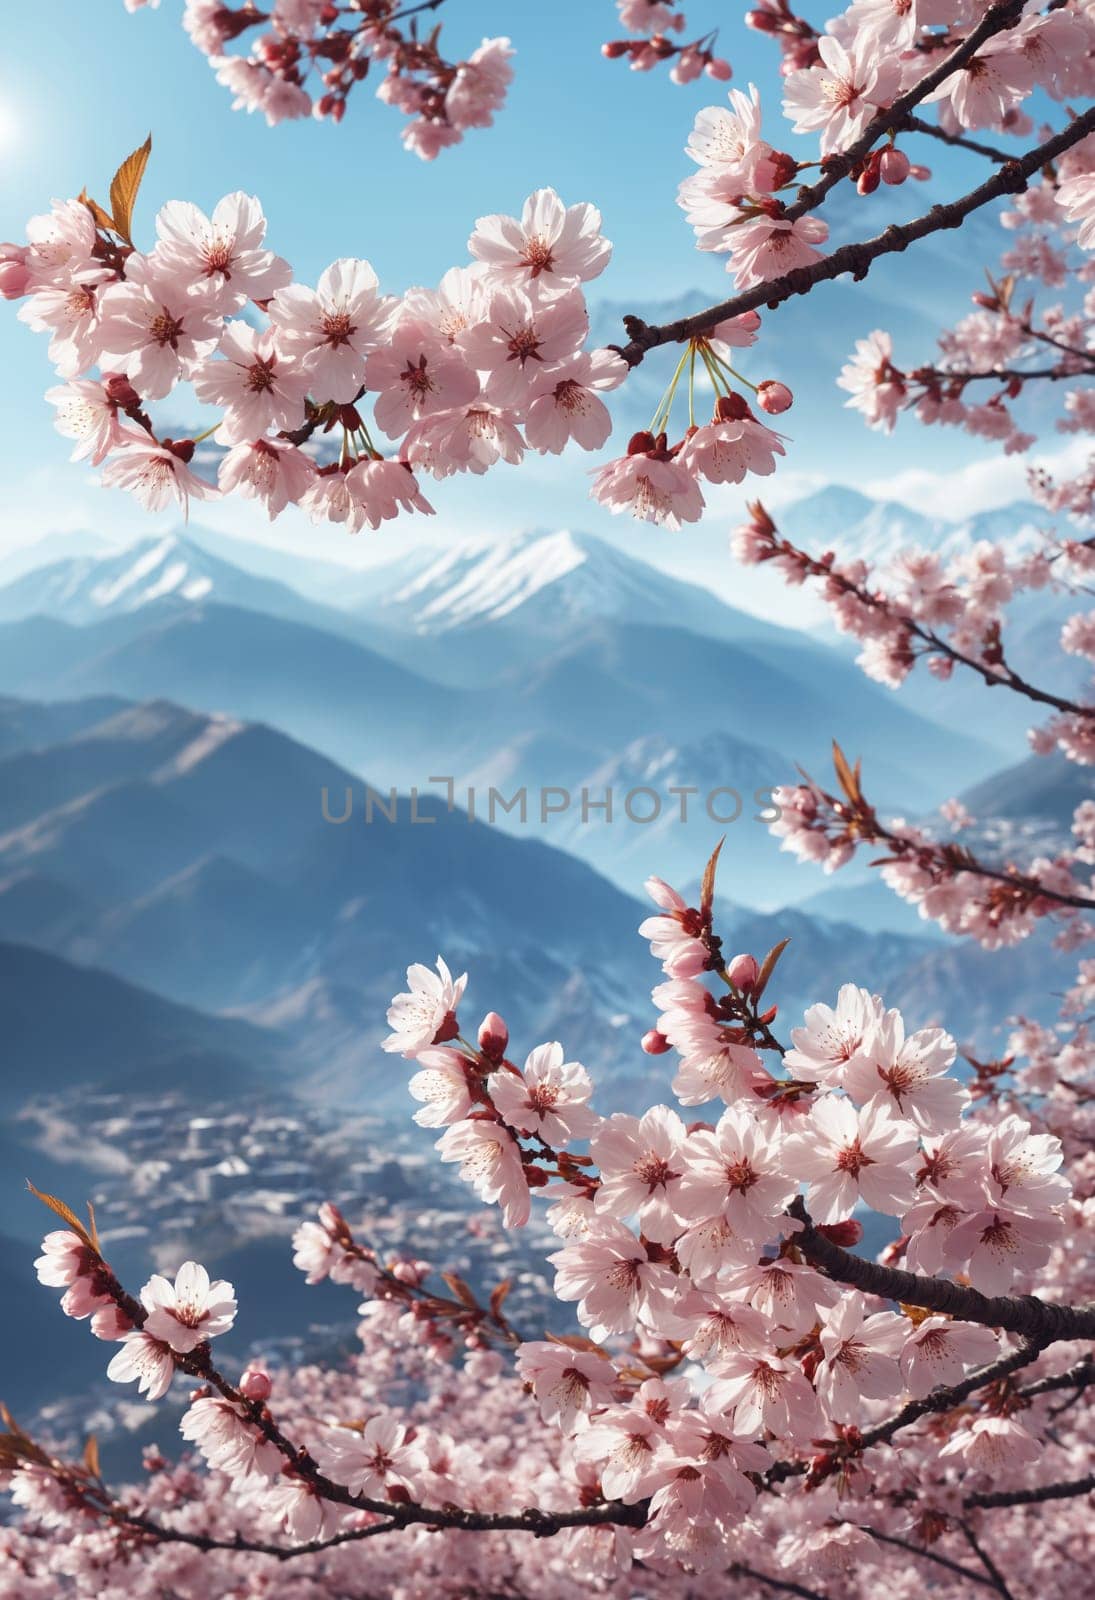 cherry blossom in spring time with blue sky and mountains background.